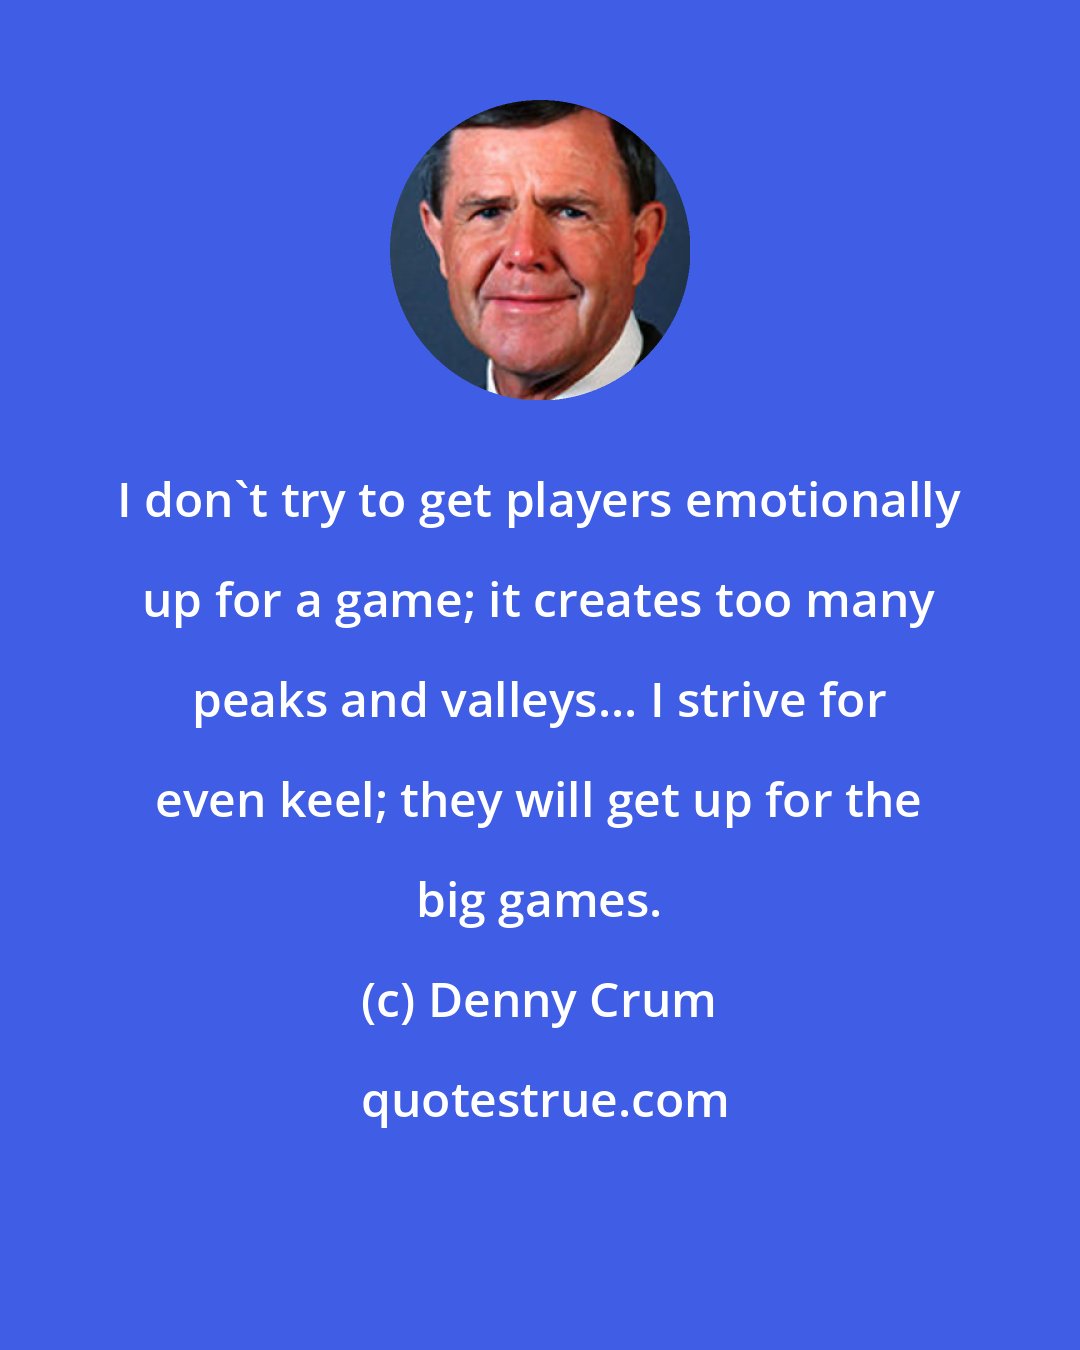 Denny Crum: I don't try to get players emotionally up for a game; it creates too many peaks and valleys... I strive for even keel; they will get up for the big games.